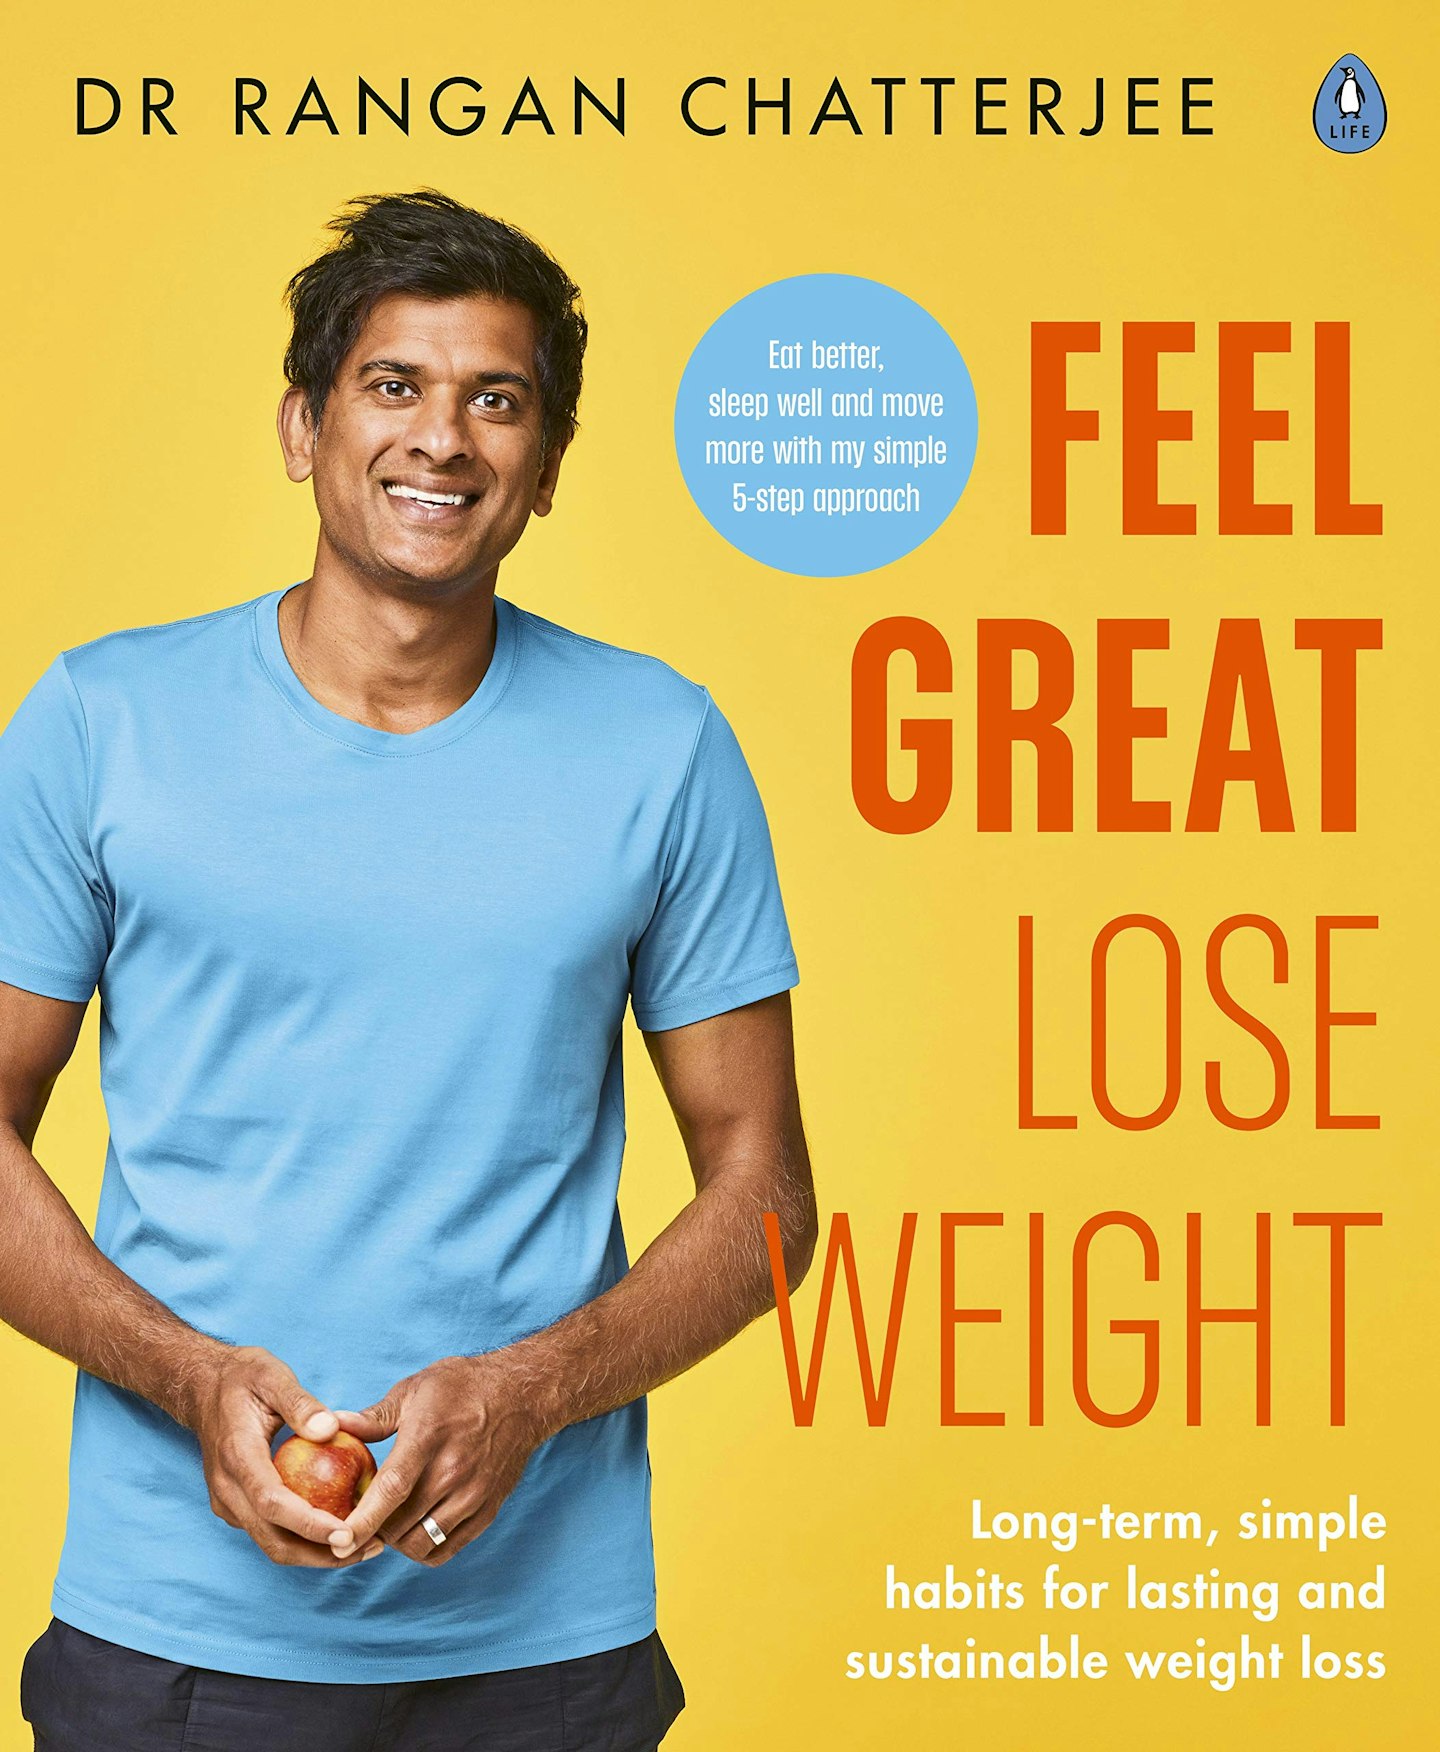 best self help books Feel Great Lose Weight: Long term, simple habits for lasting and sustainable weight loss, by Dr Rangan Chatterjee